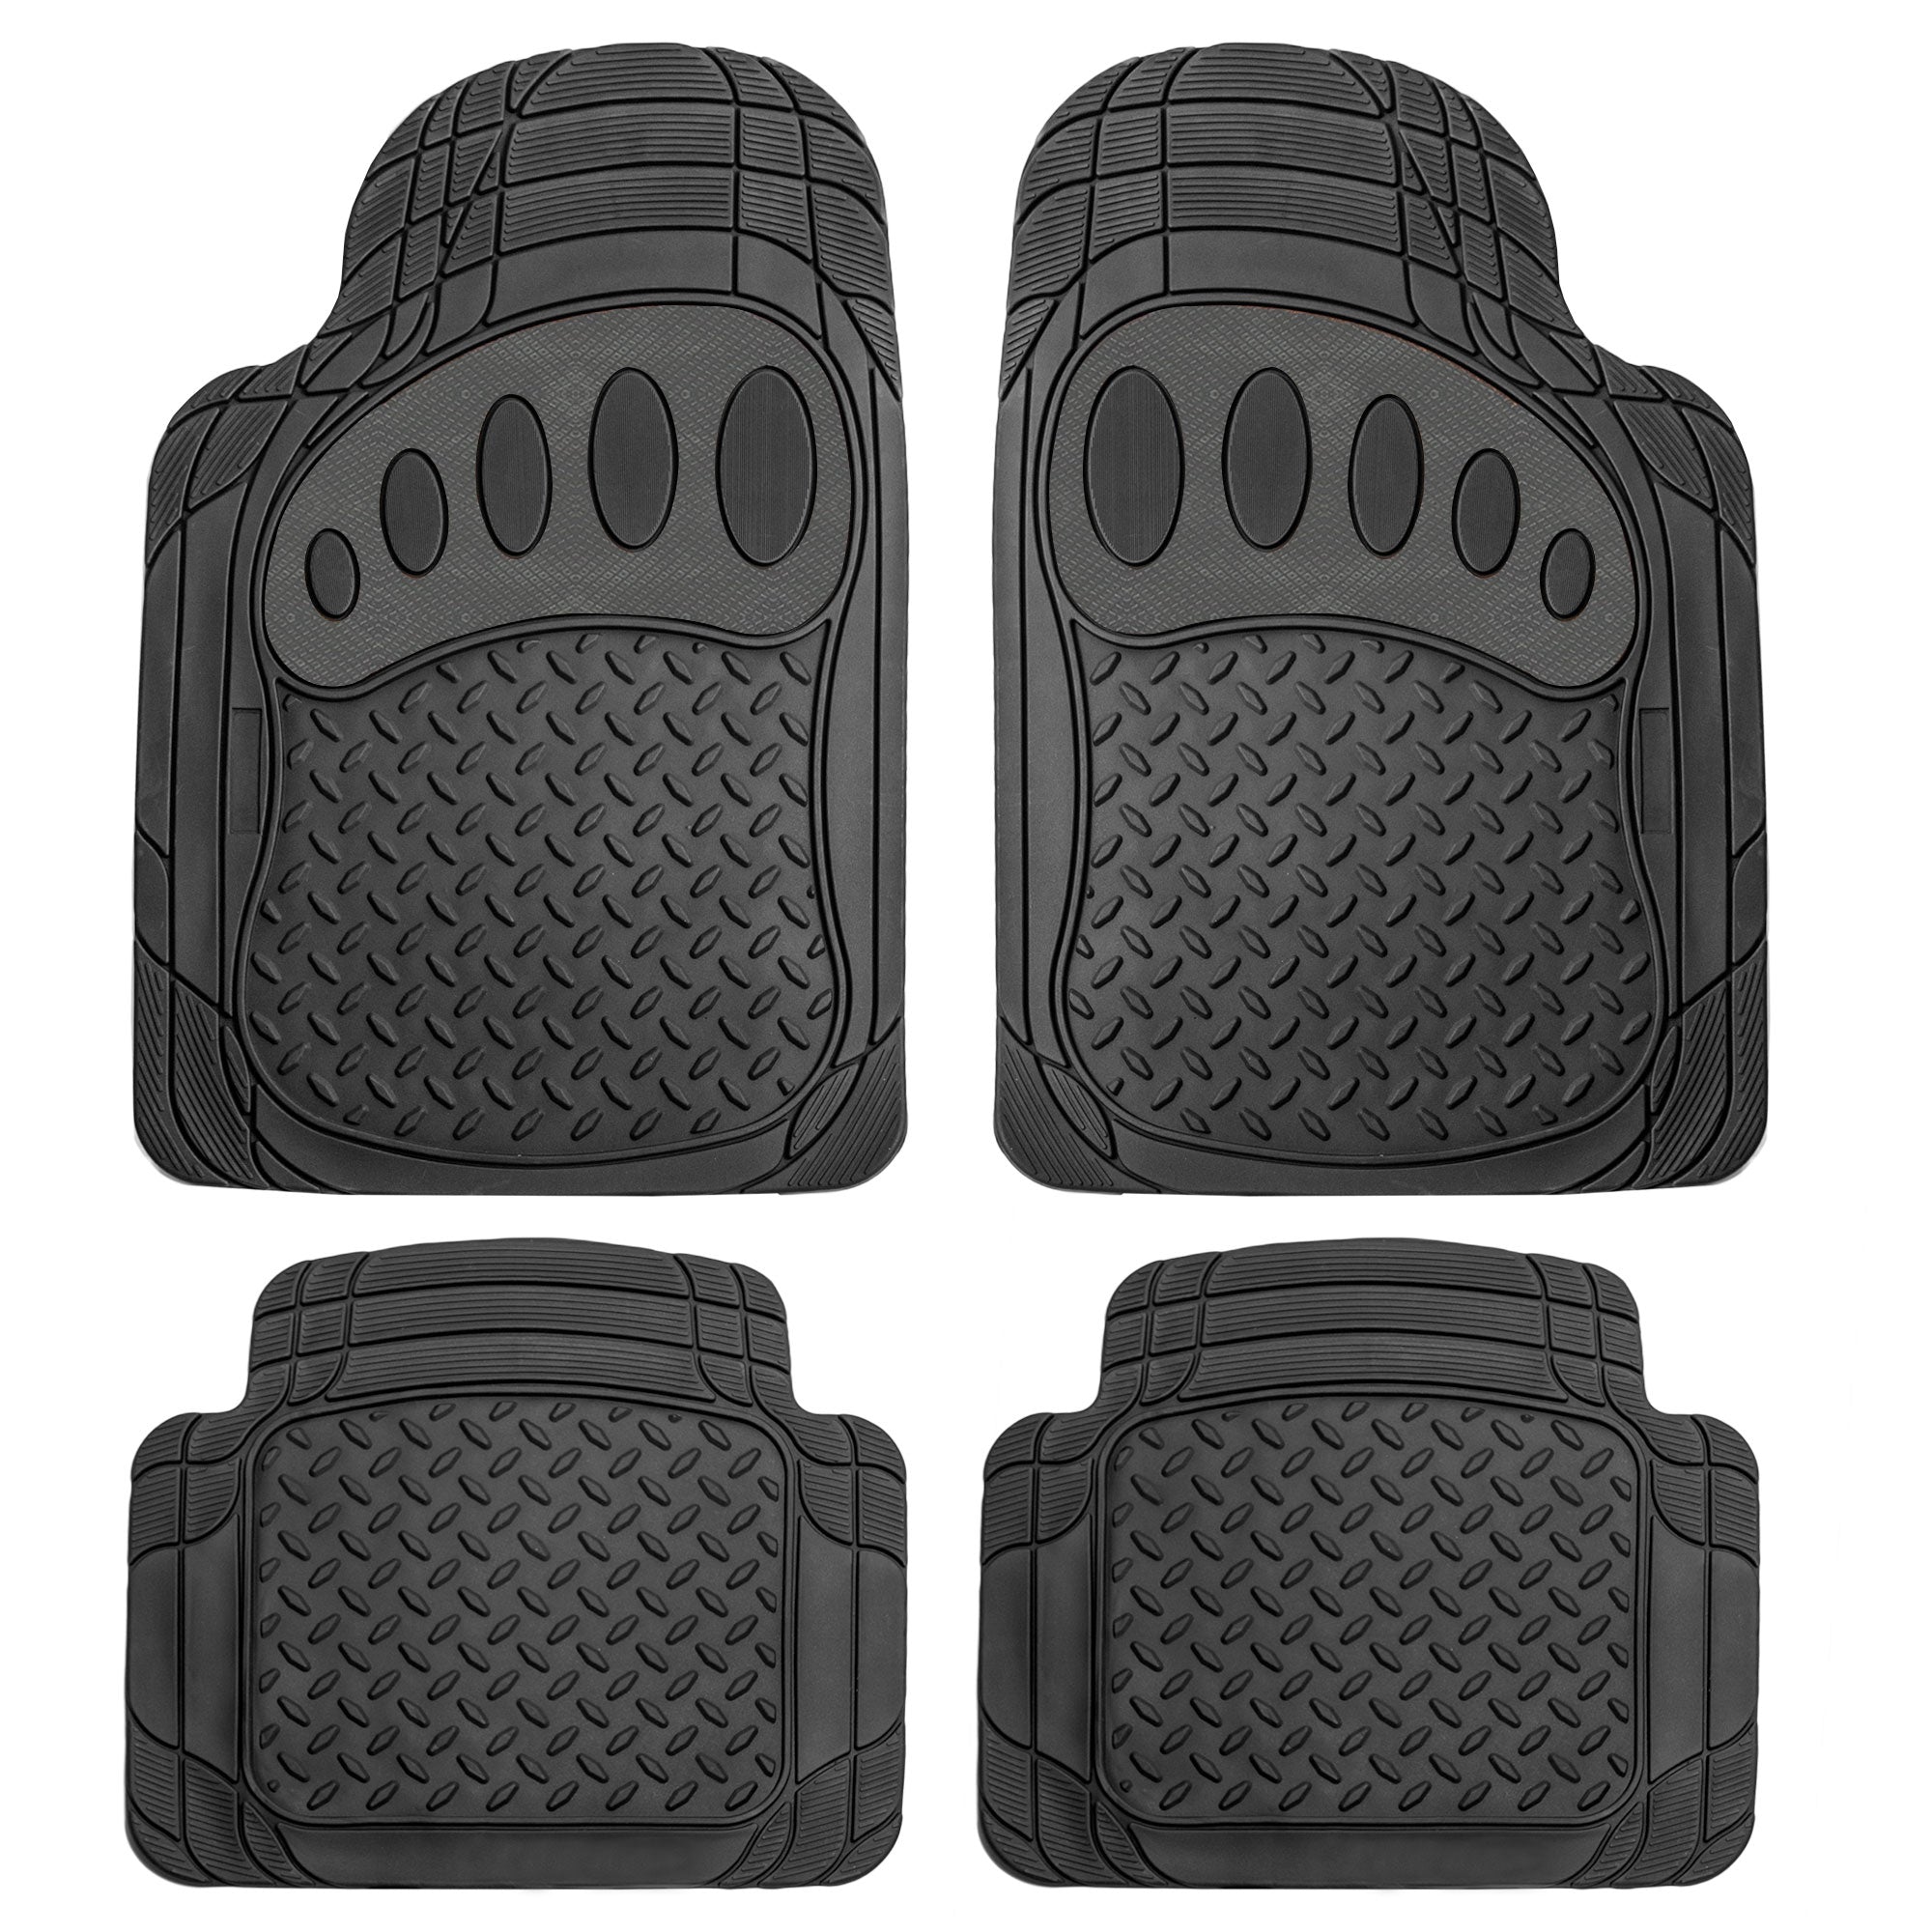  FH Group Automotive Floor Mats - Heavy-Duty Rubber Floor Mats  for Cars, Universal Fit Full Set, Climaproof & Trimmable Floor Mats for  Most Sedan, SUV, Truck, Black : Everything Else